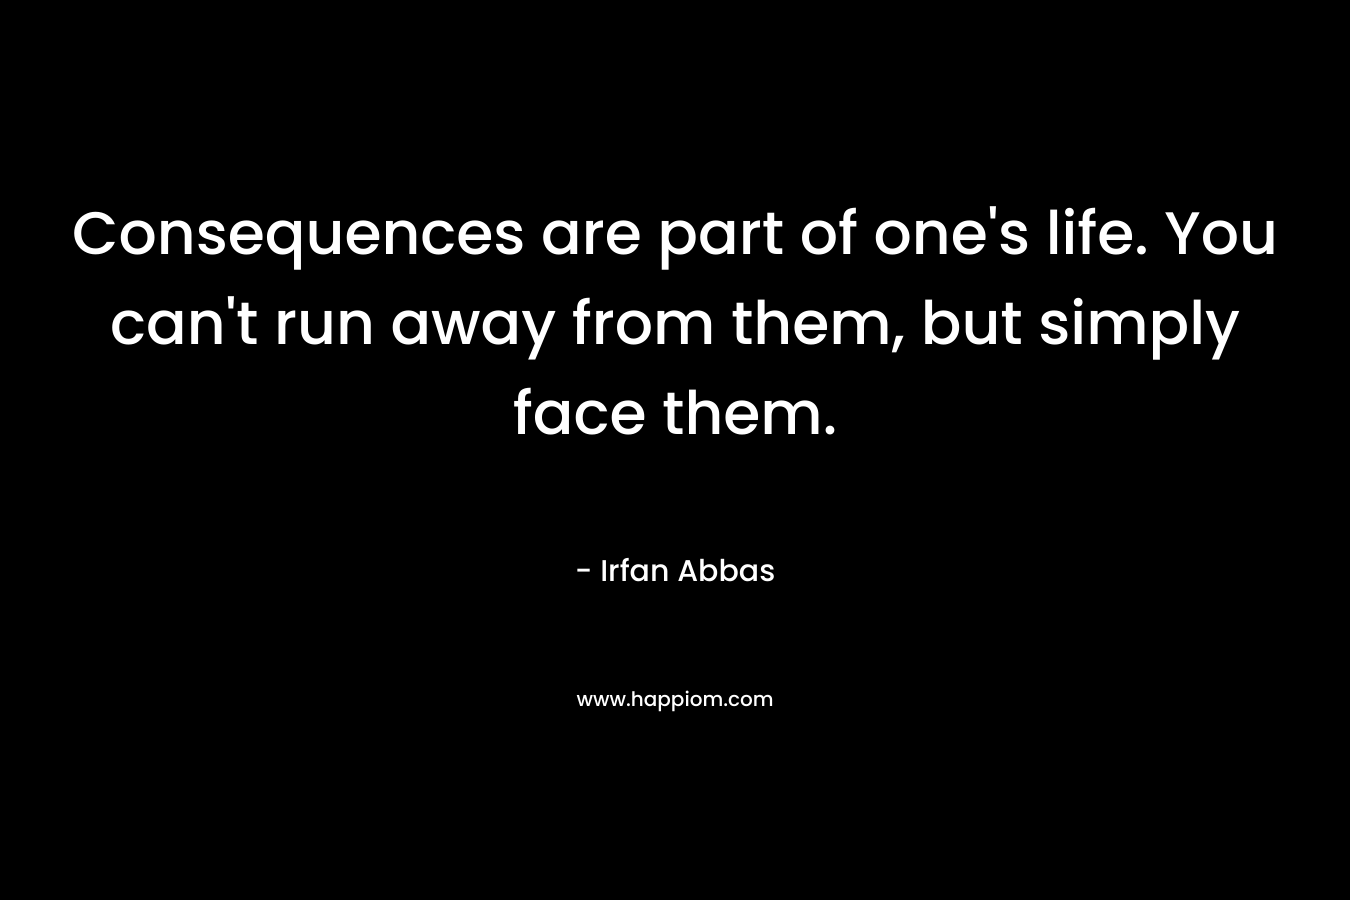 Consequences are part of one's life. You can't run away from them, but simply face them.